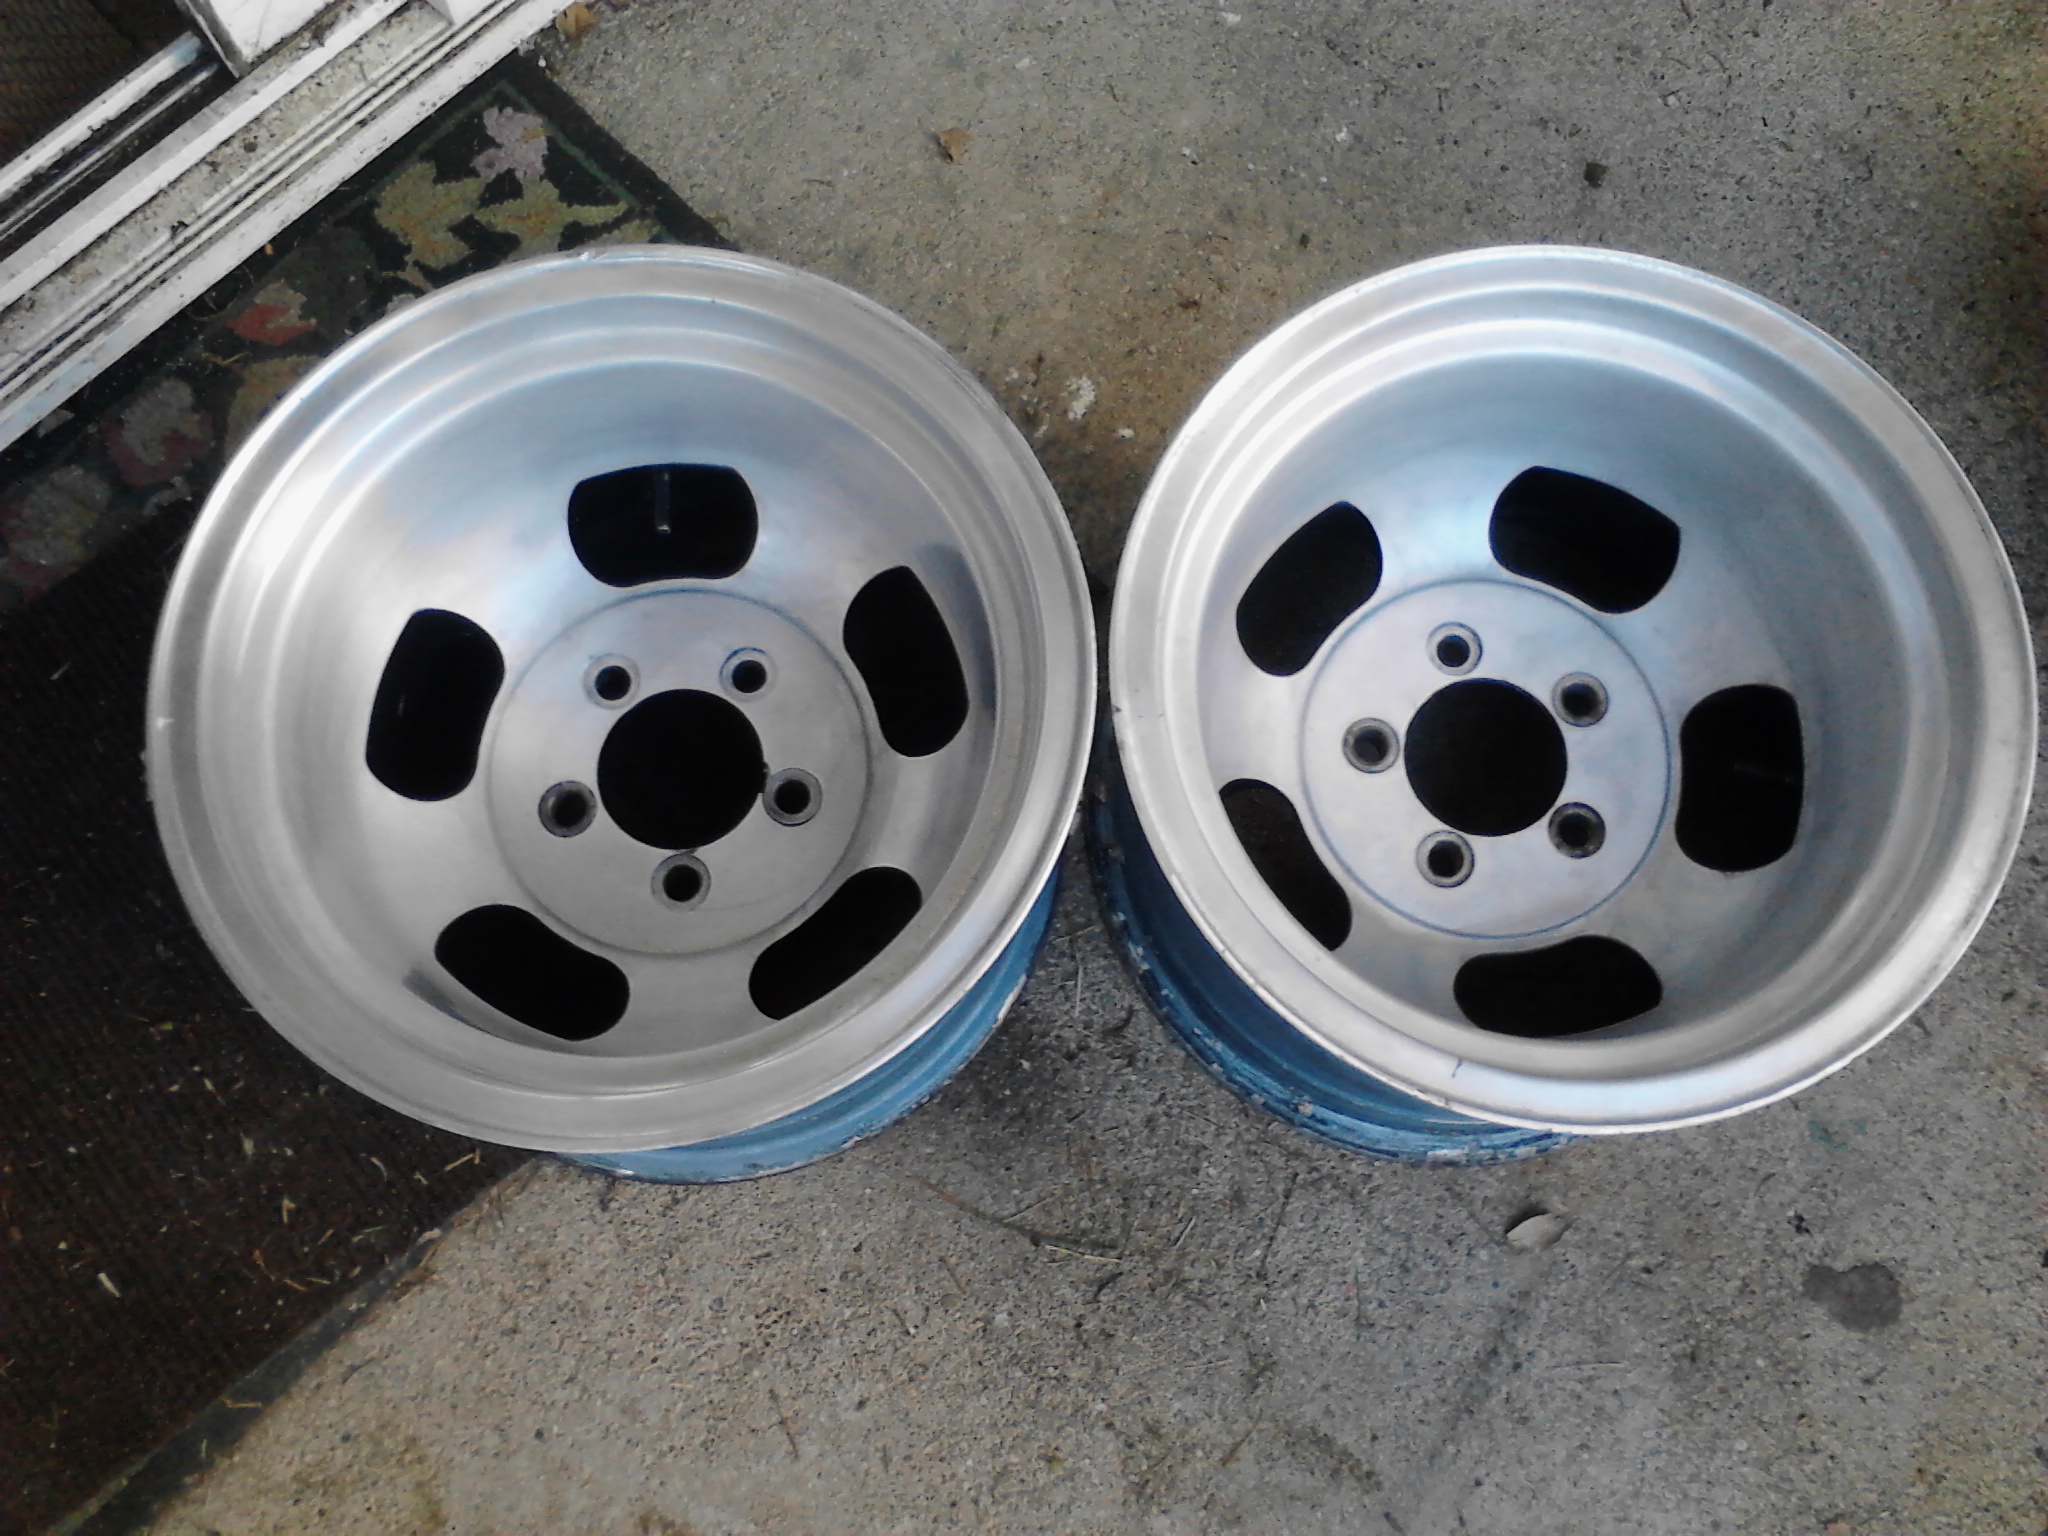 Mothers aluminum and mag polish turns aluminum wheels dull - Page 2 - Ford  Truck Enthusiasts Forums